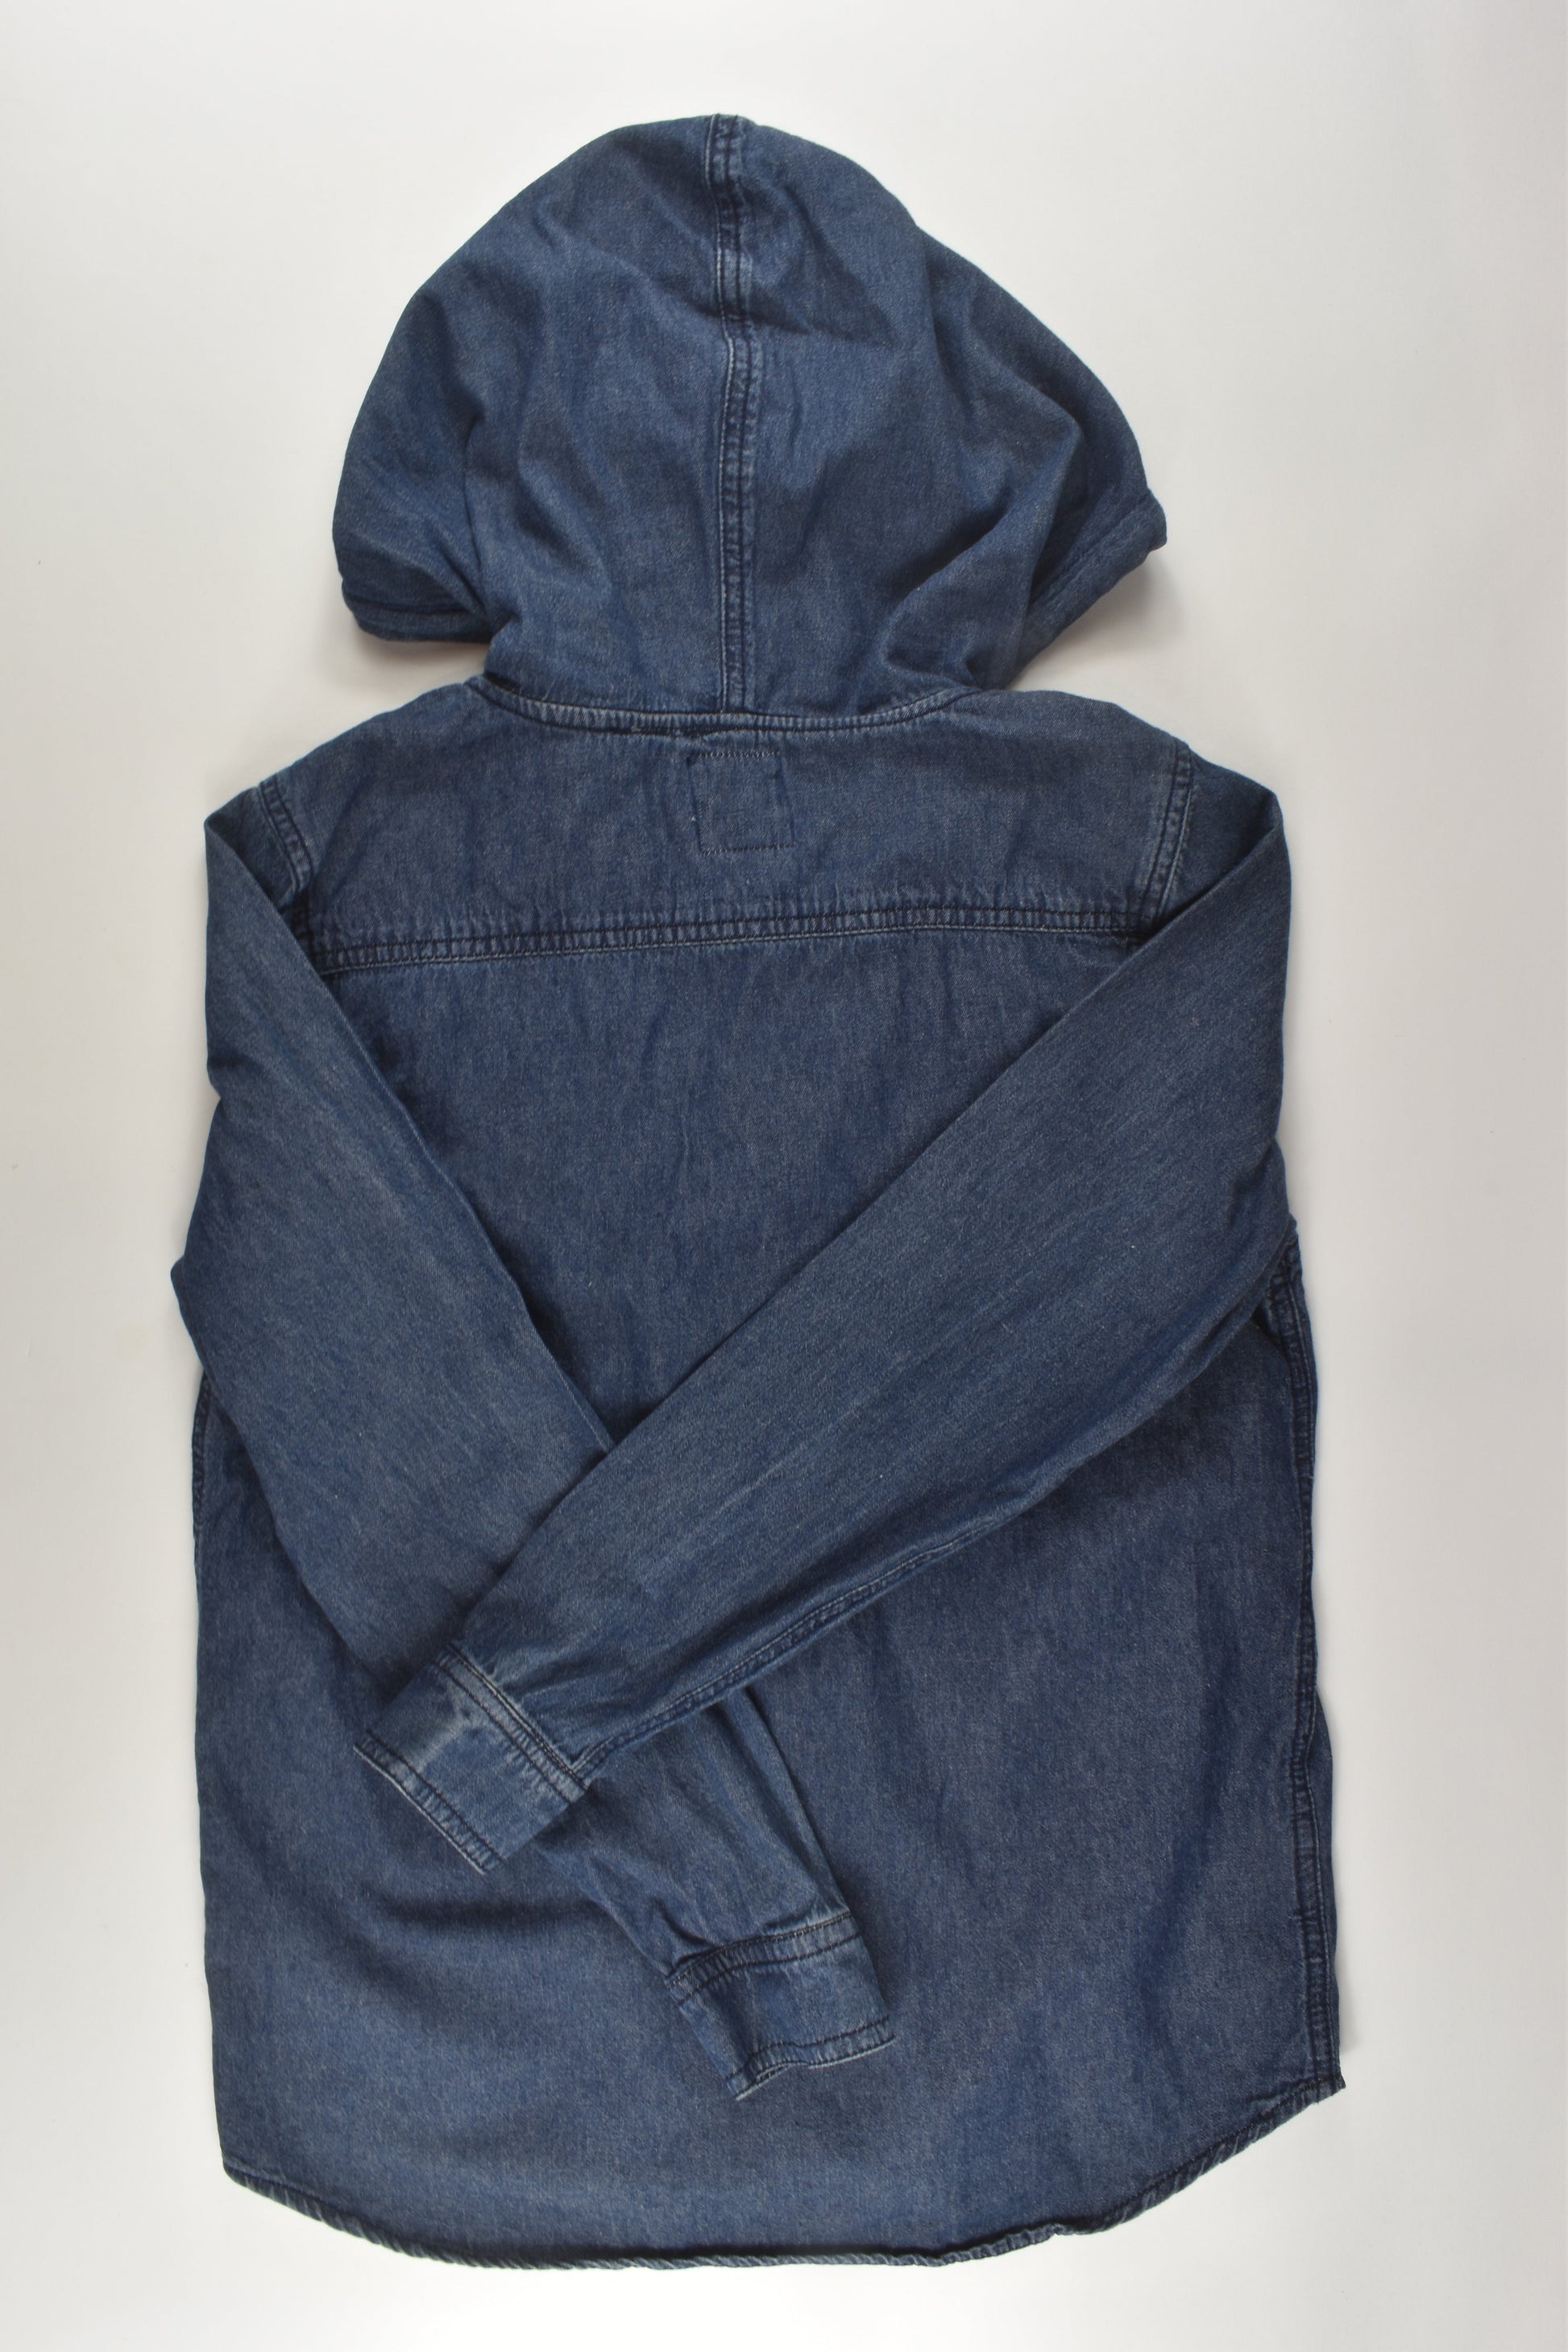 Country Road Size 12 Denim Shirt with Hood